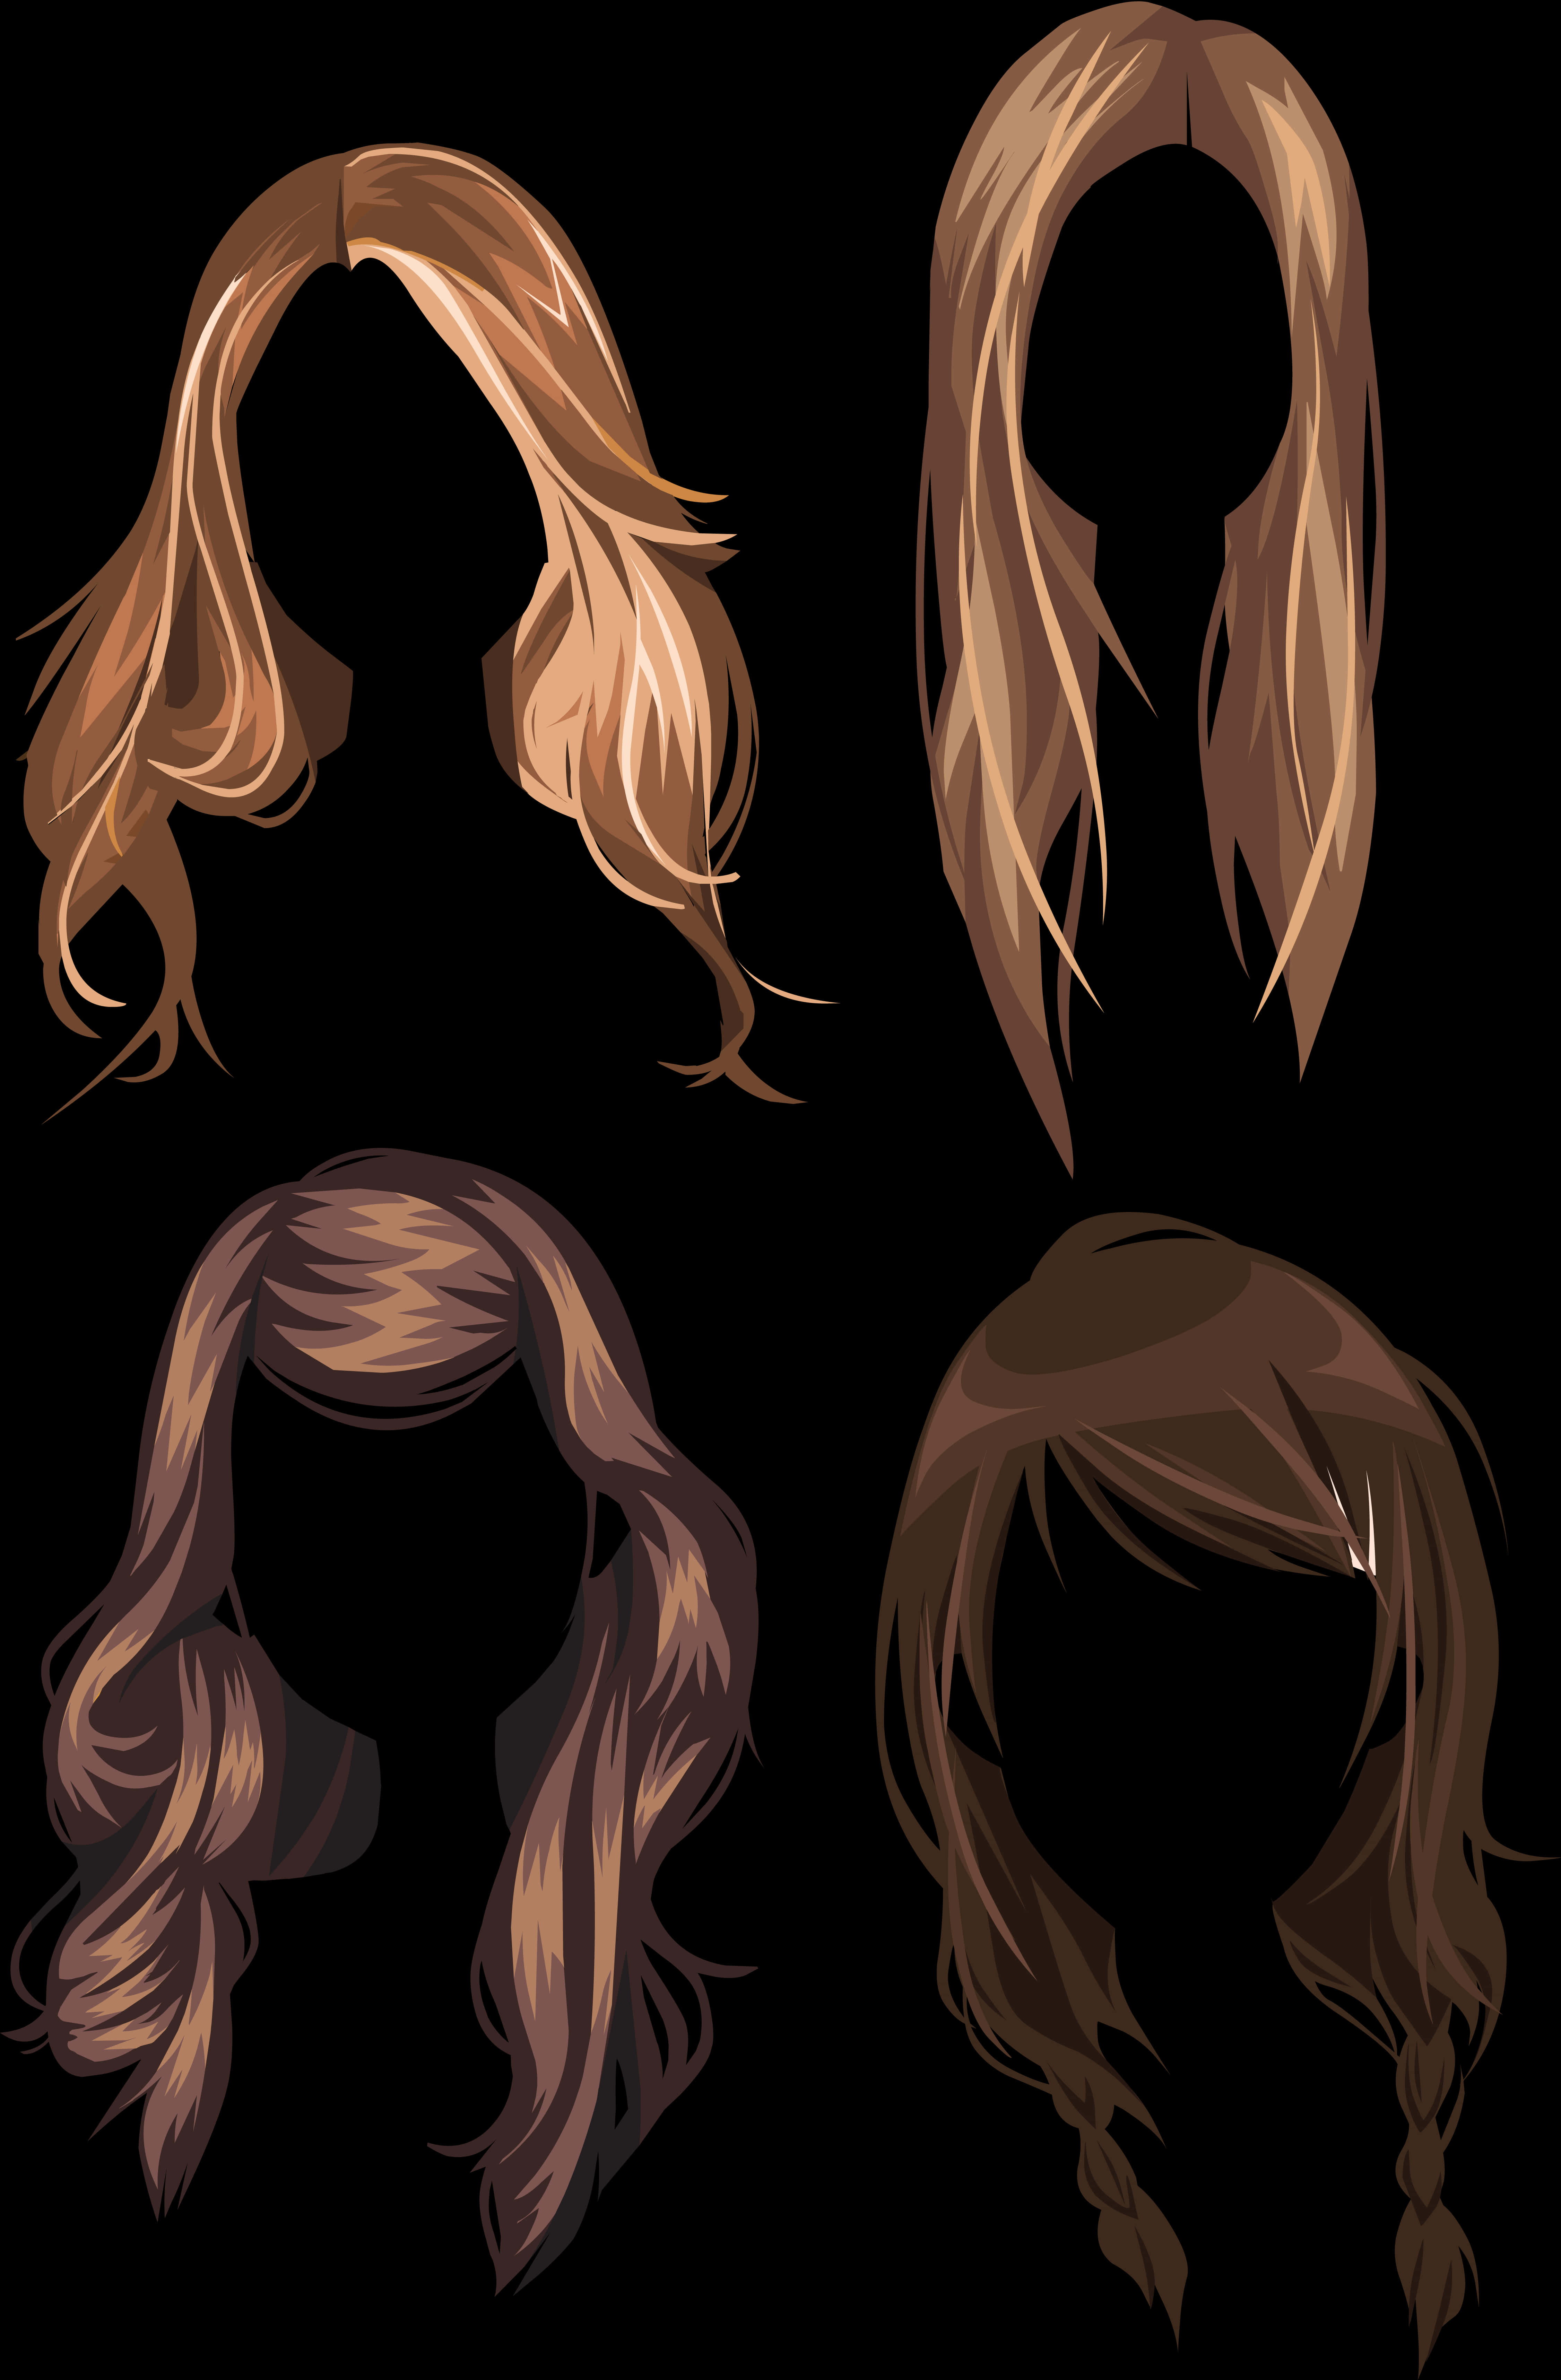 Different Hair Styles On A Black Background